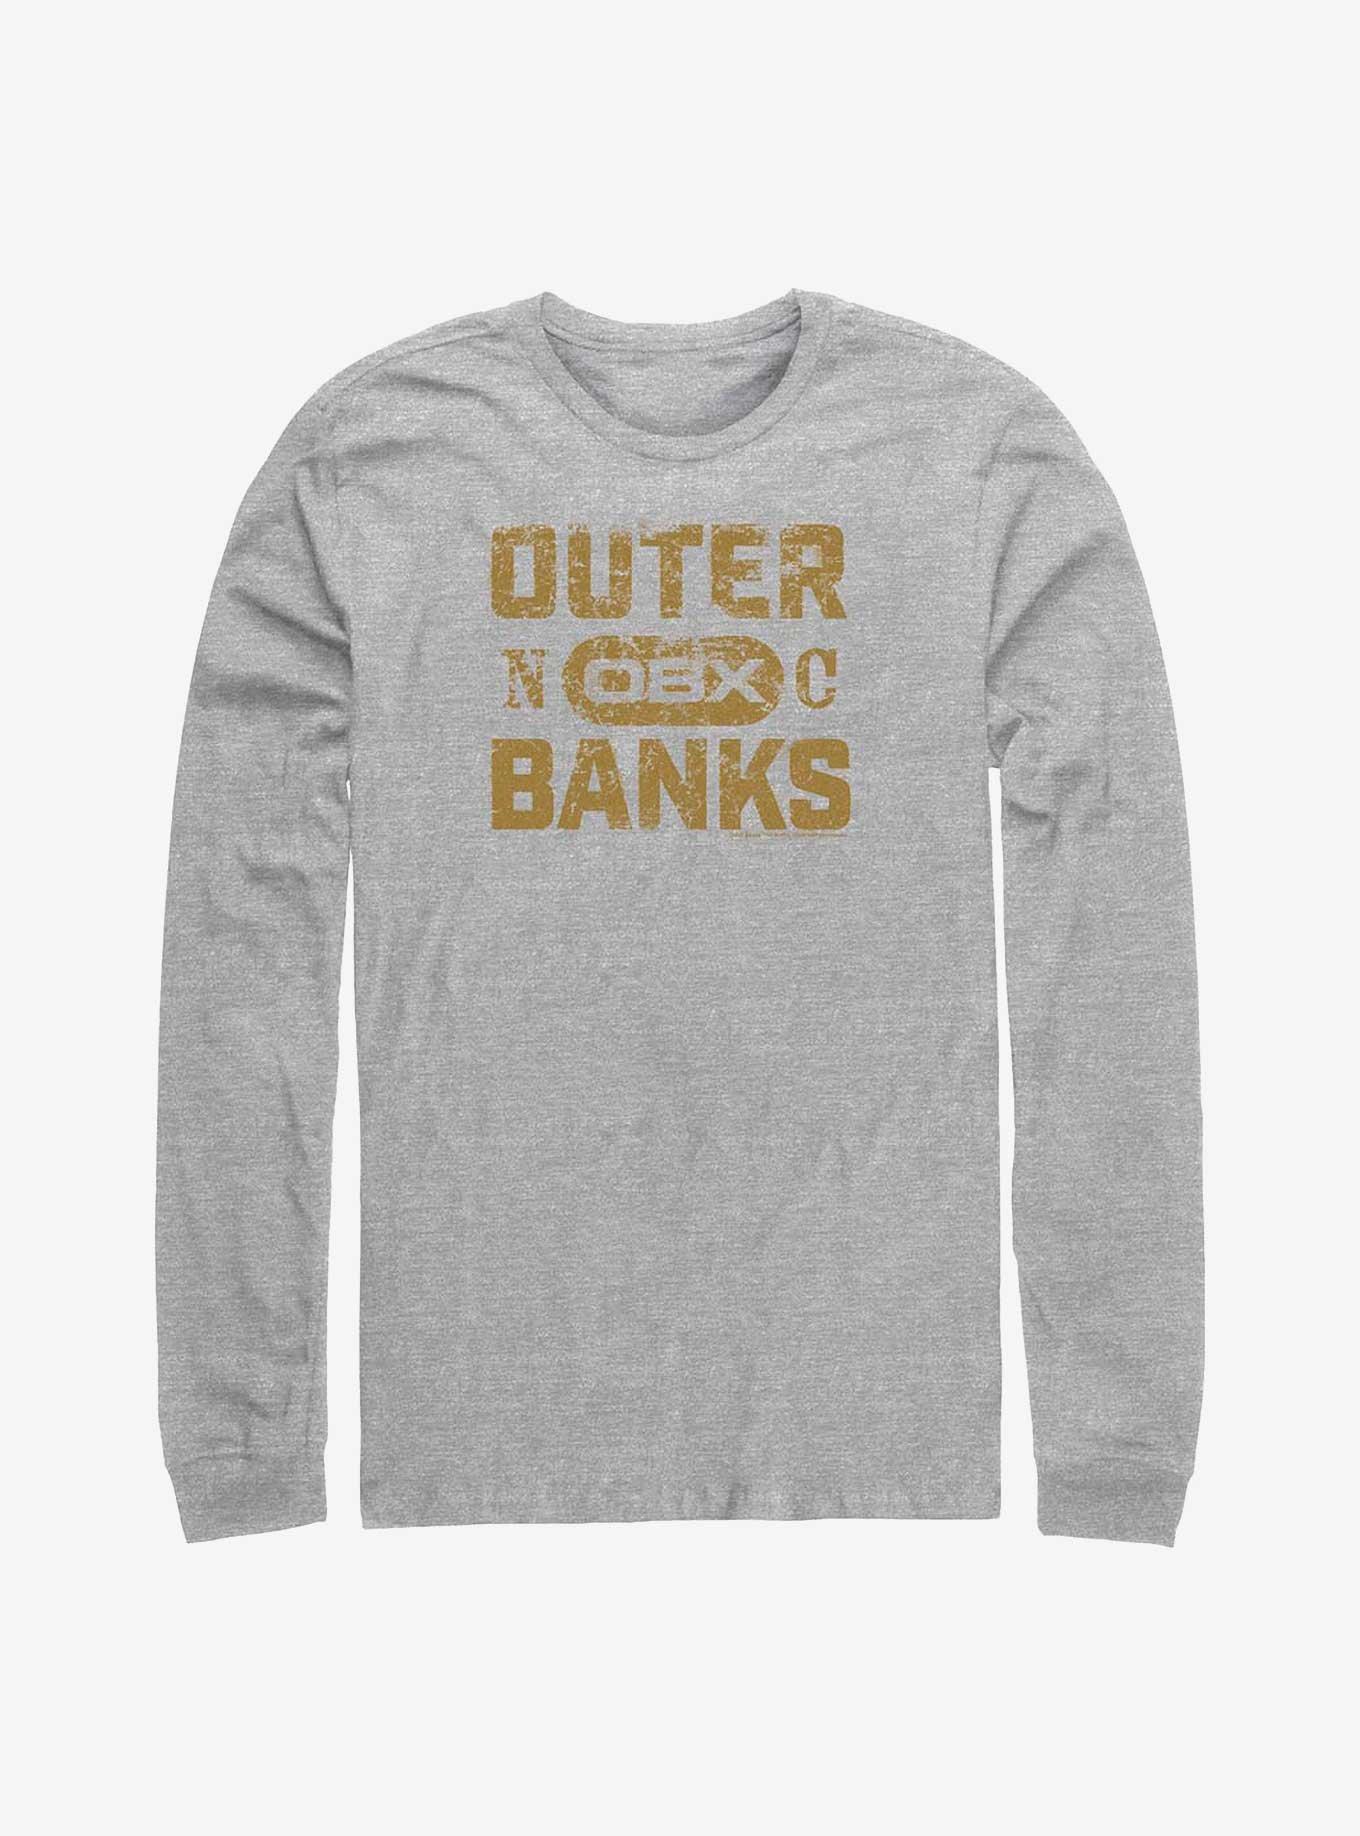 Outer Banks Distressed Type Long-Sleeve T-Shirt